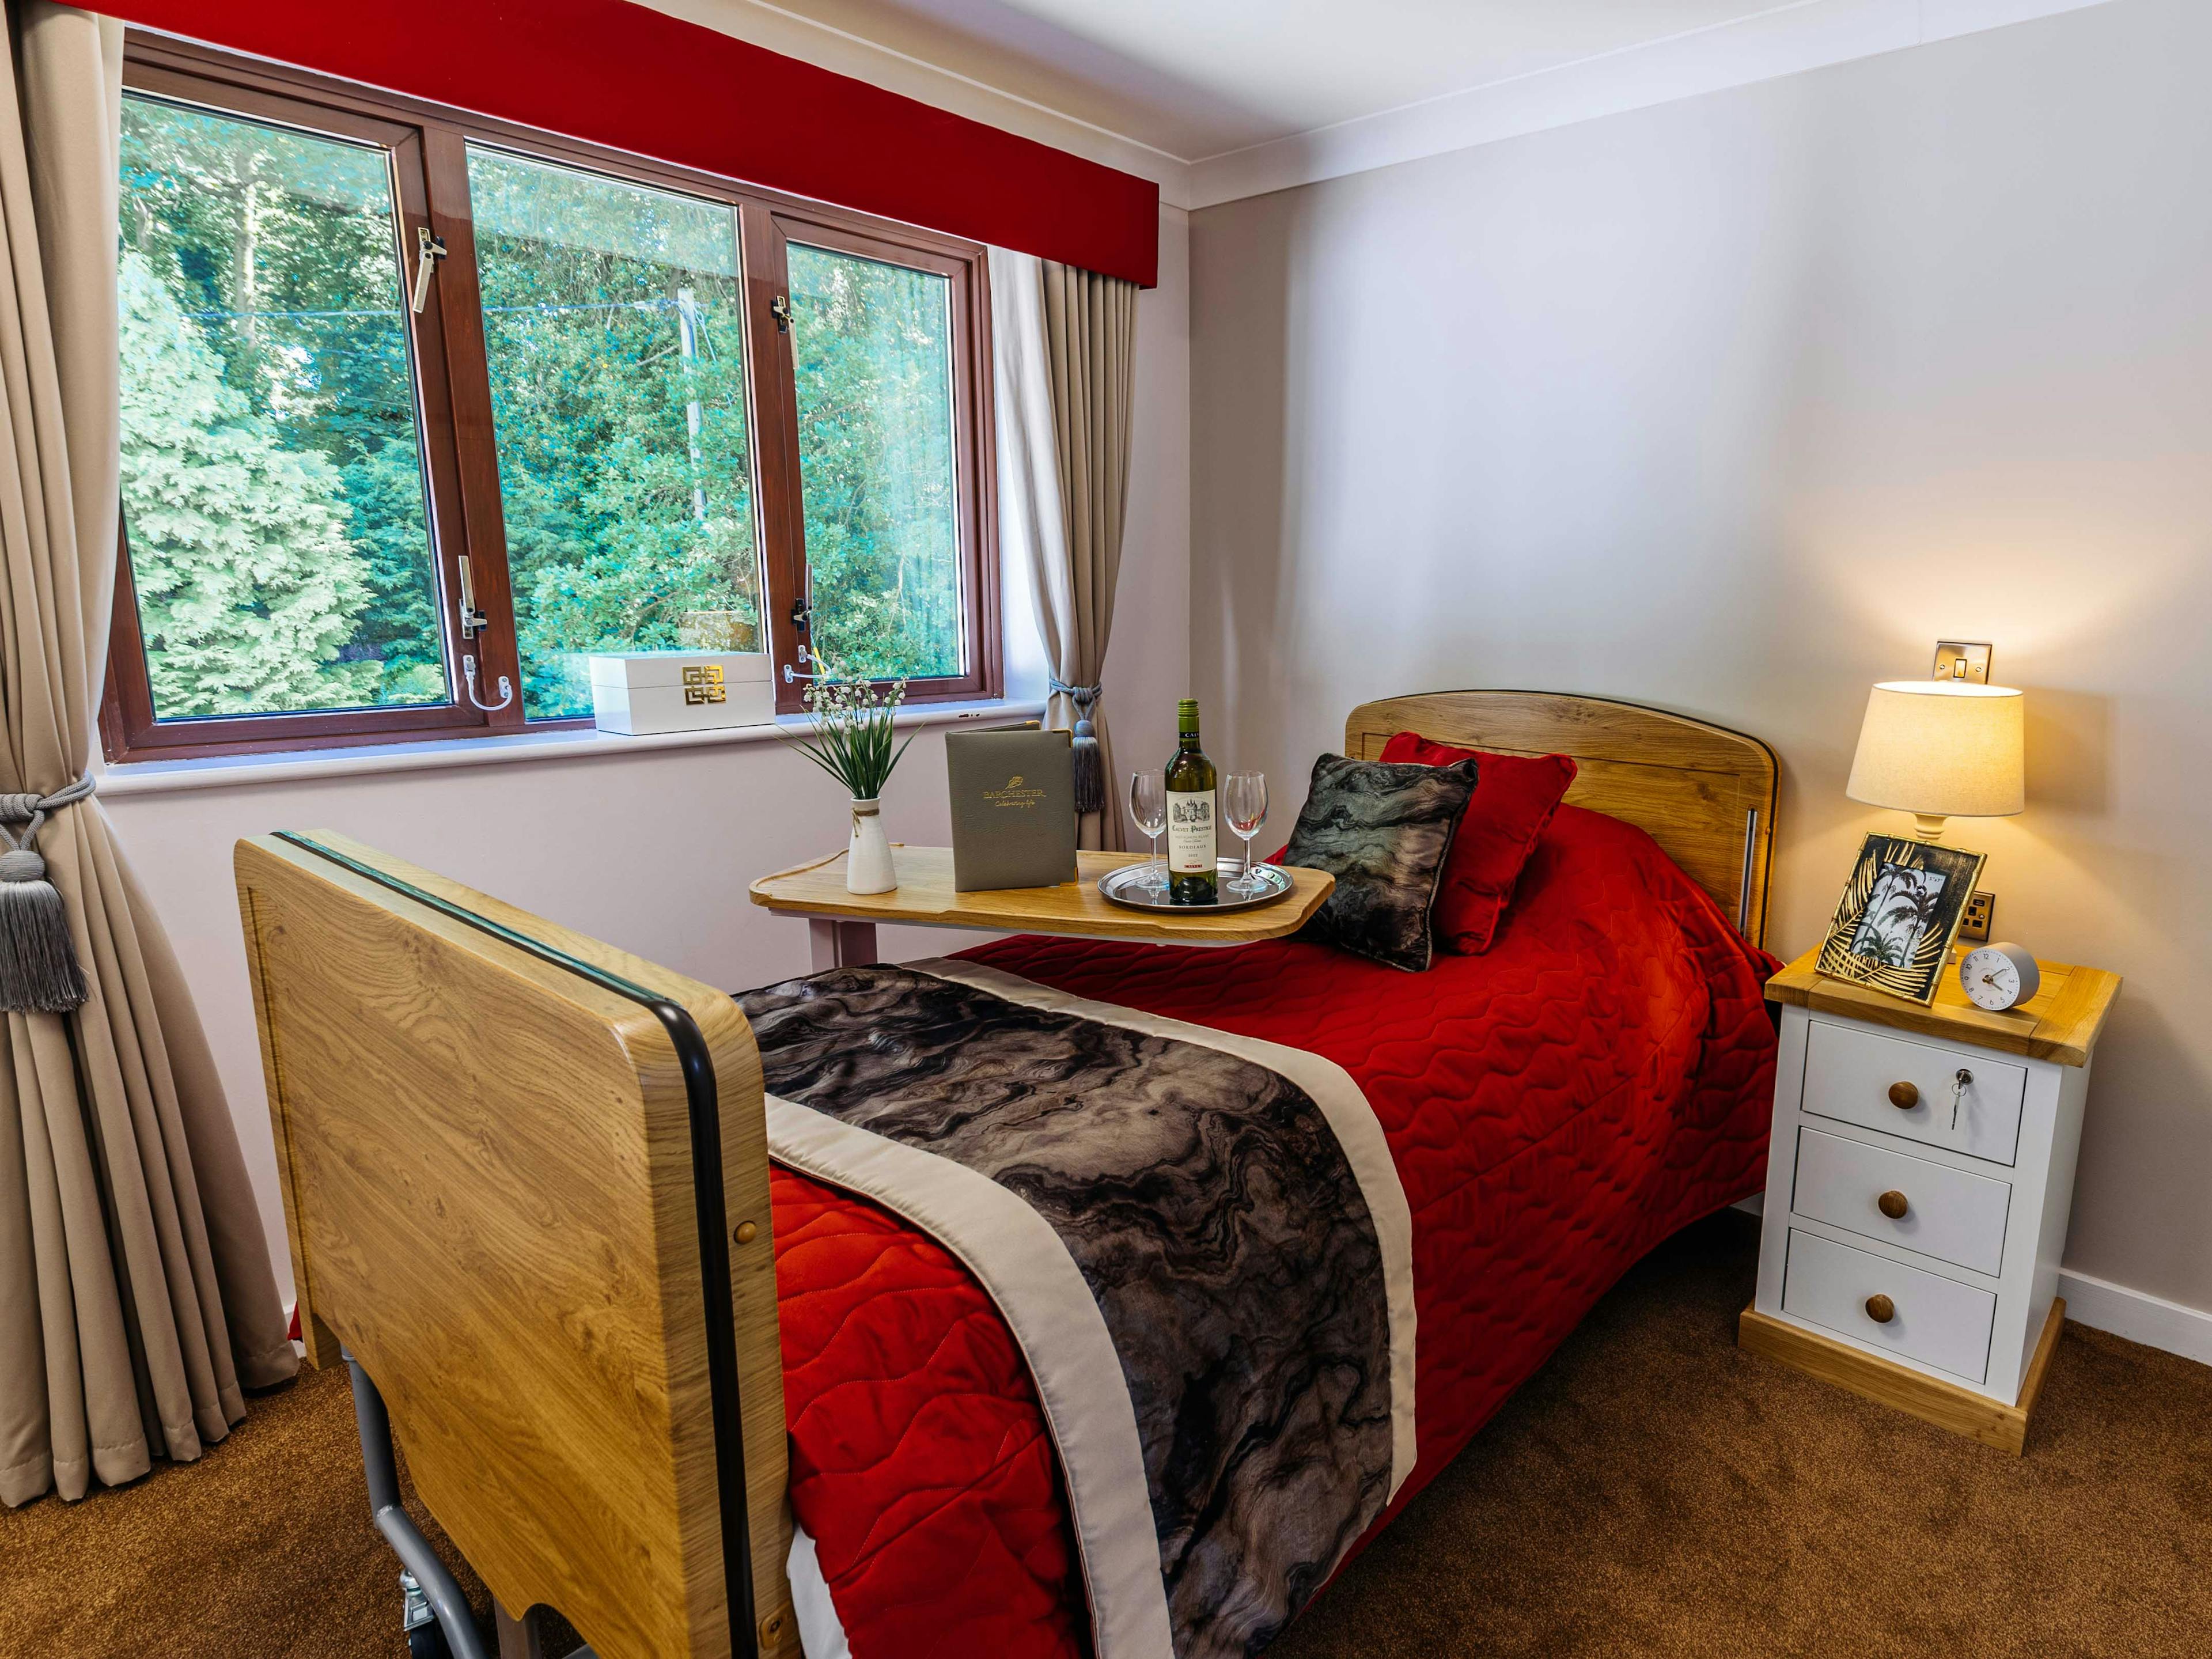 Bedroom at Lawton Manor Care Home in Kidsgrove, Newcastle-under-Lyme